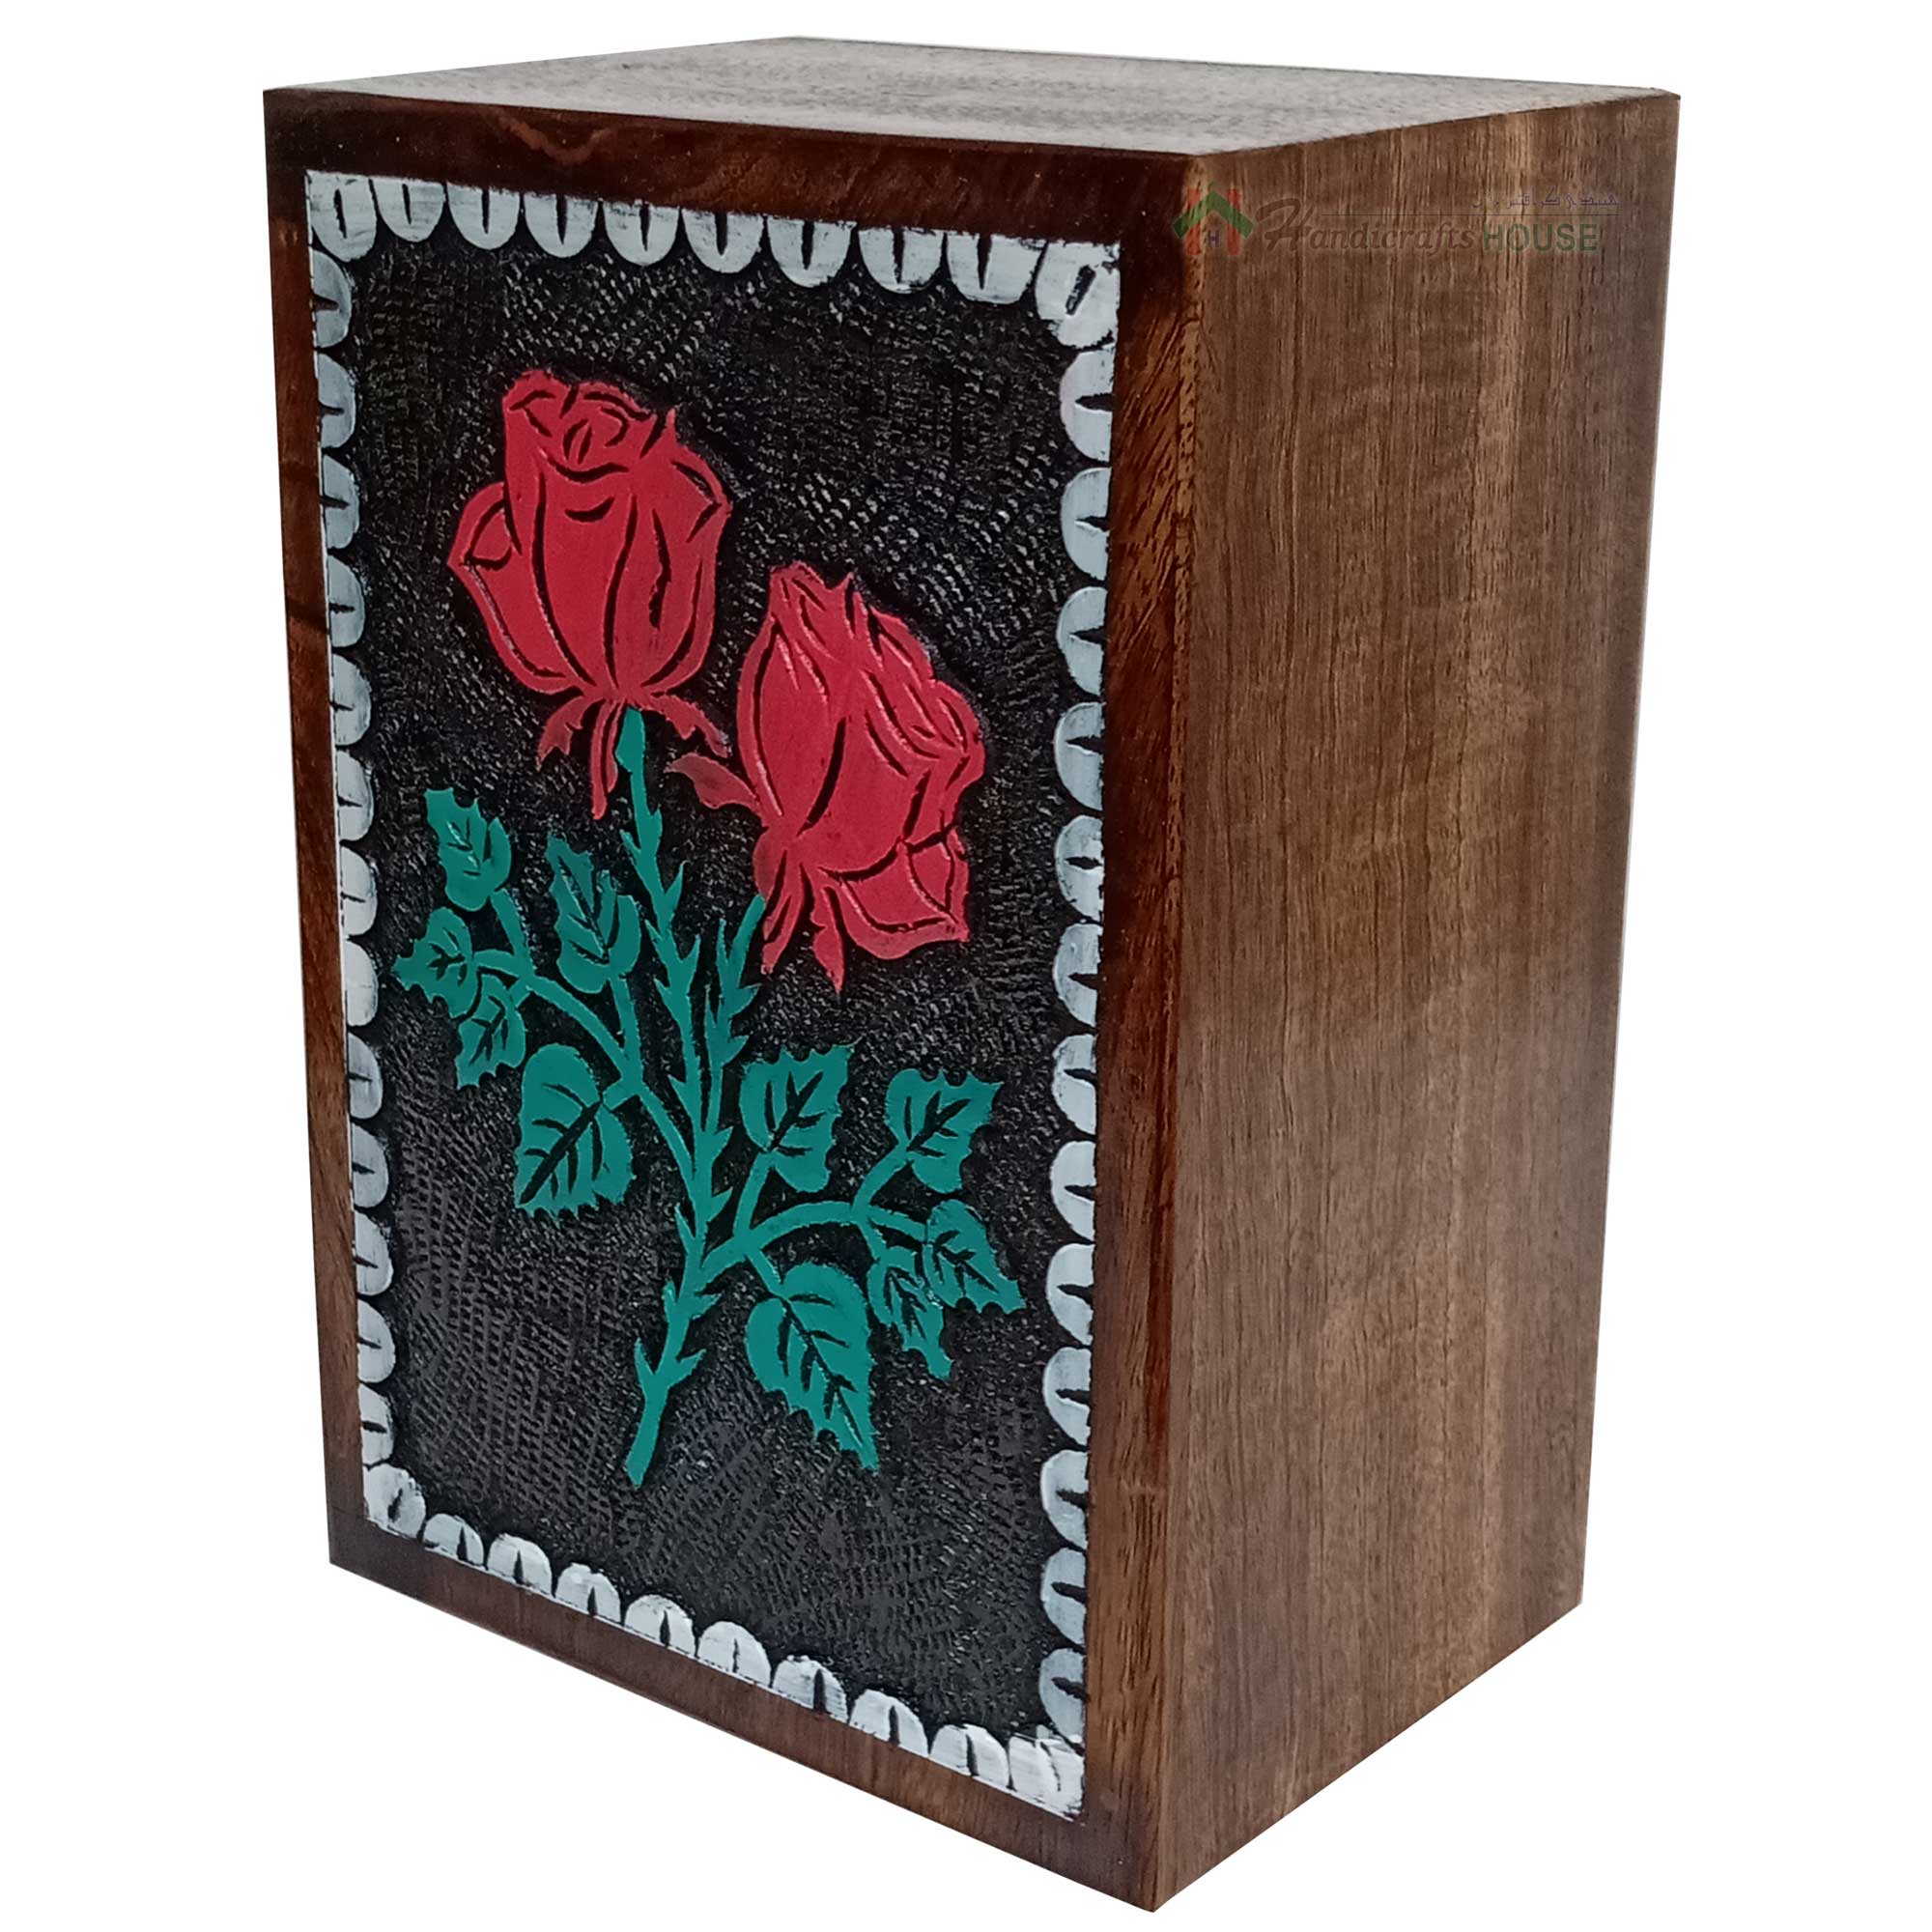 Hands Engraving Rose Flower Wooden Cremation Urns, Wood Funeral Urn for Human or Pet Ashes Adult - Hardwood Memorial Large Box for Loved One